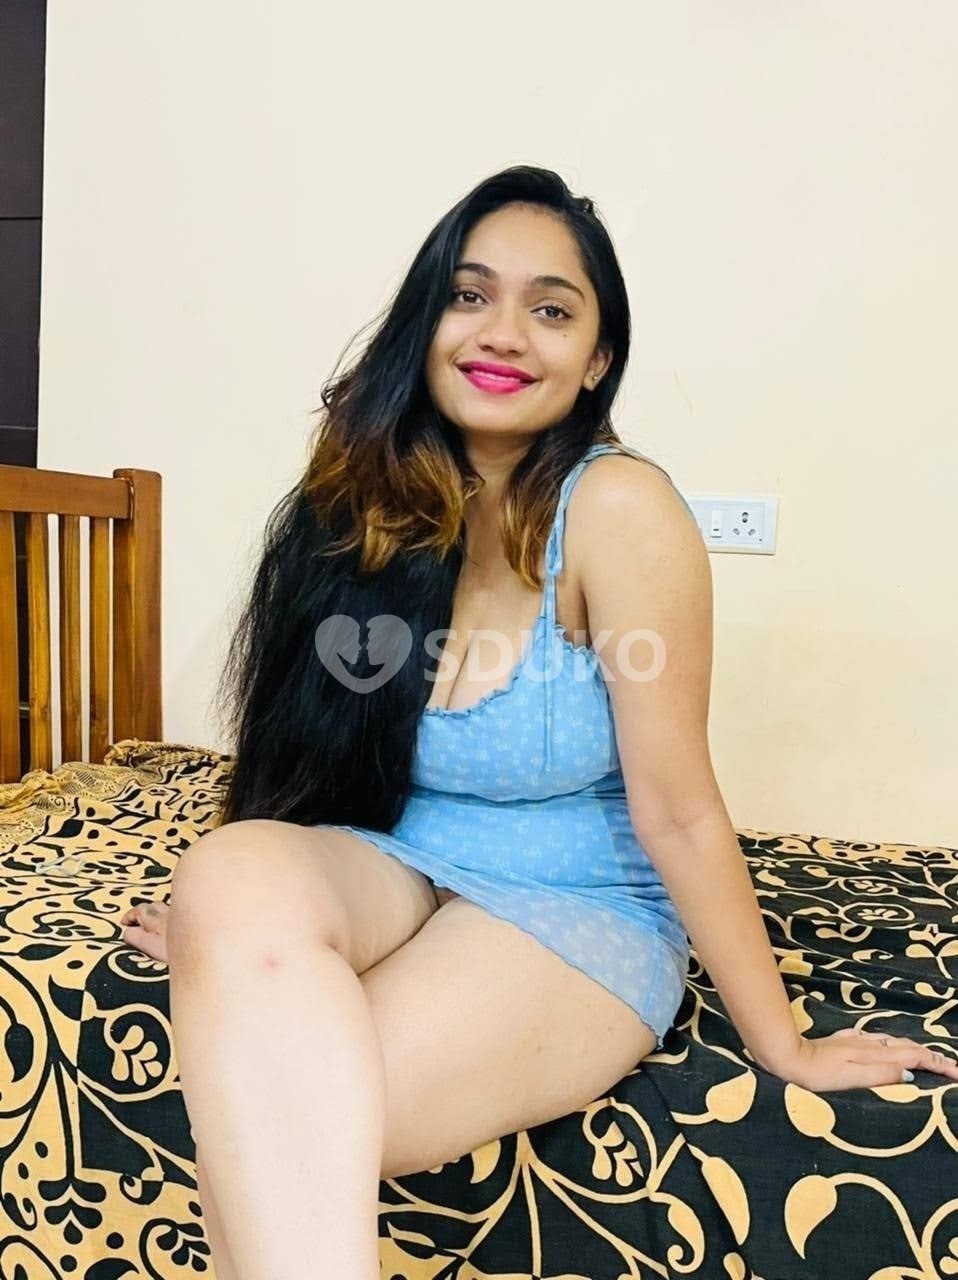 Hinjewadi ✨✨💯 Best call girl service in low price high profile call girls available call me anytime this number o